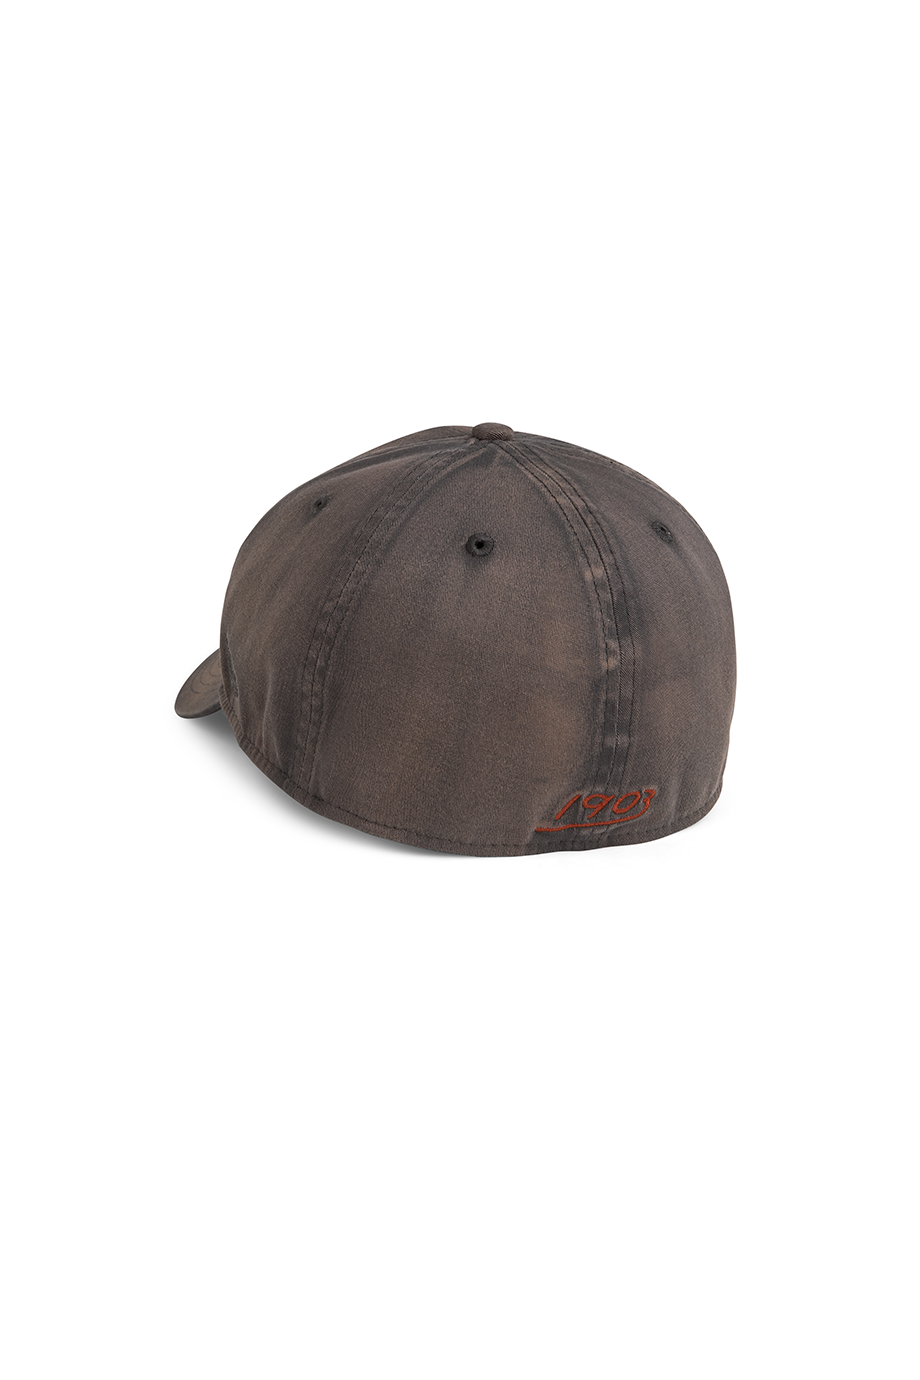 Bar & Shield Fitted Hat - Blackened Pearl